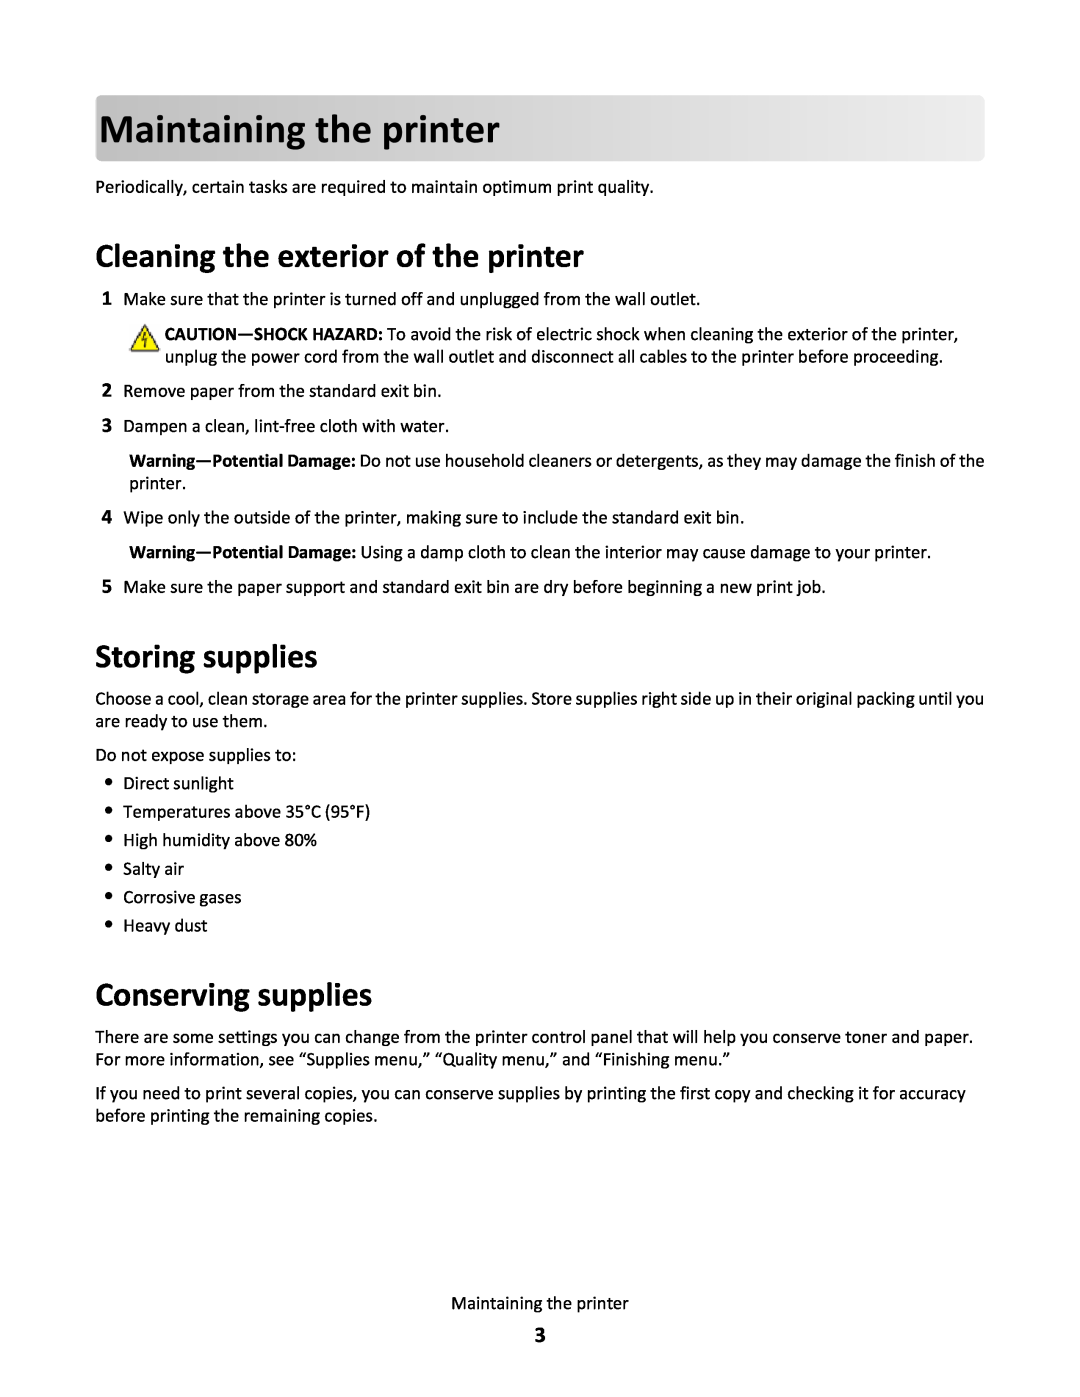 Lexmark T654DTN, T650 Maintaining the printer, Cleaning the exterior of the printer, Storing supplies, Conserving supplies 